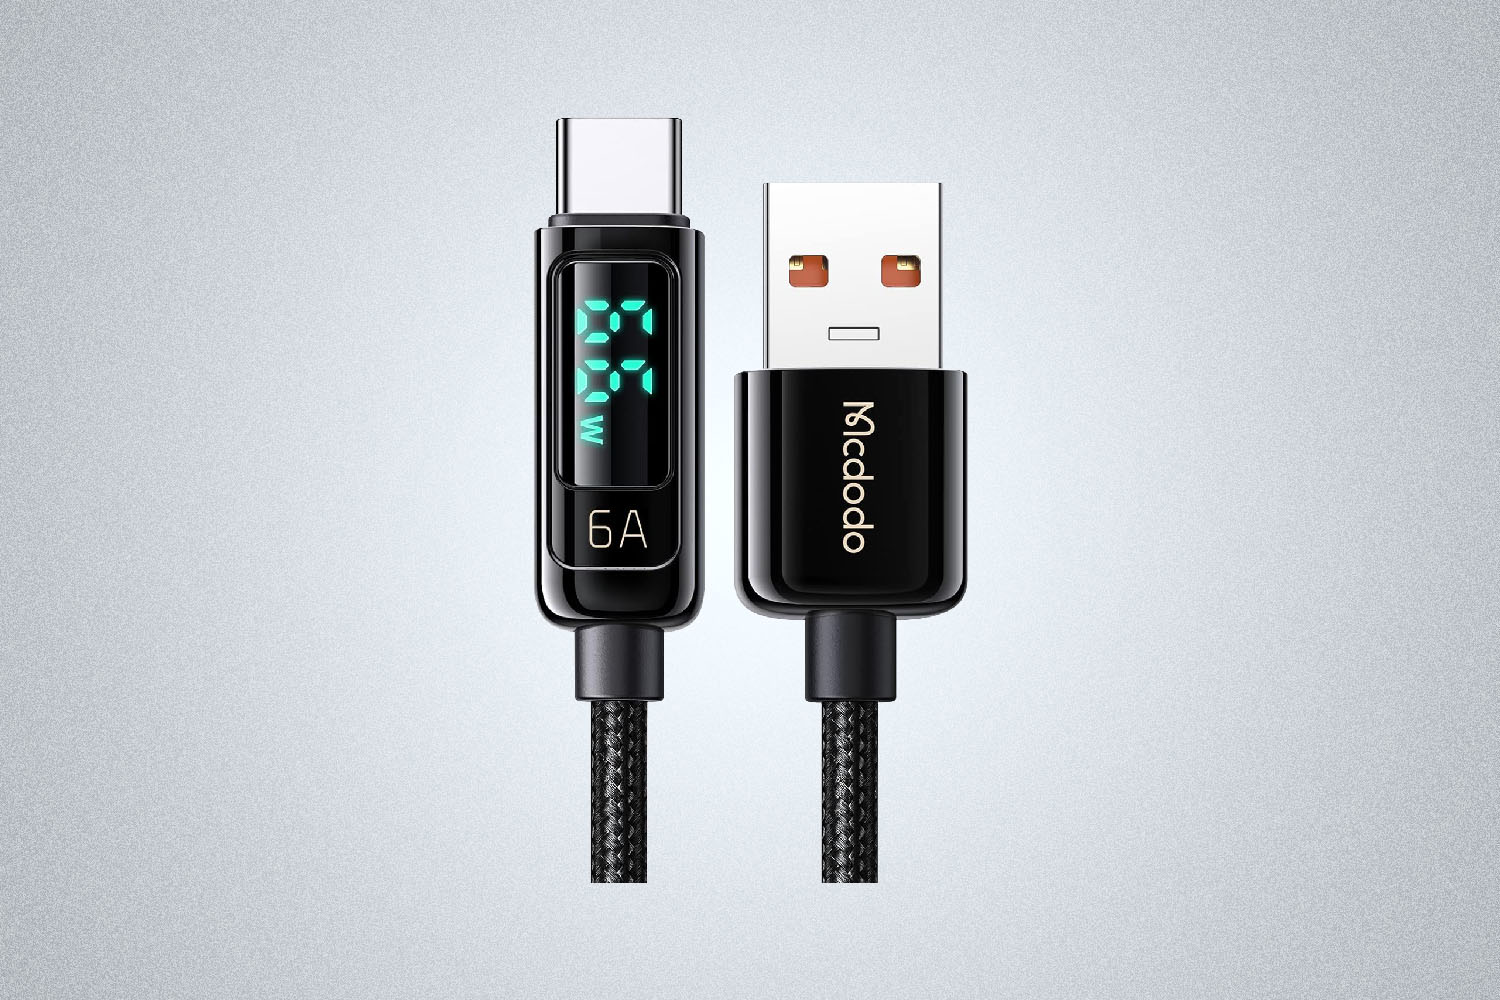 https://www.insidehook.com/wp-content/uploads/2023/10/Mcdodo-USB-C-Cable-with-built-in-display-.jpg?fit=1200%2C800